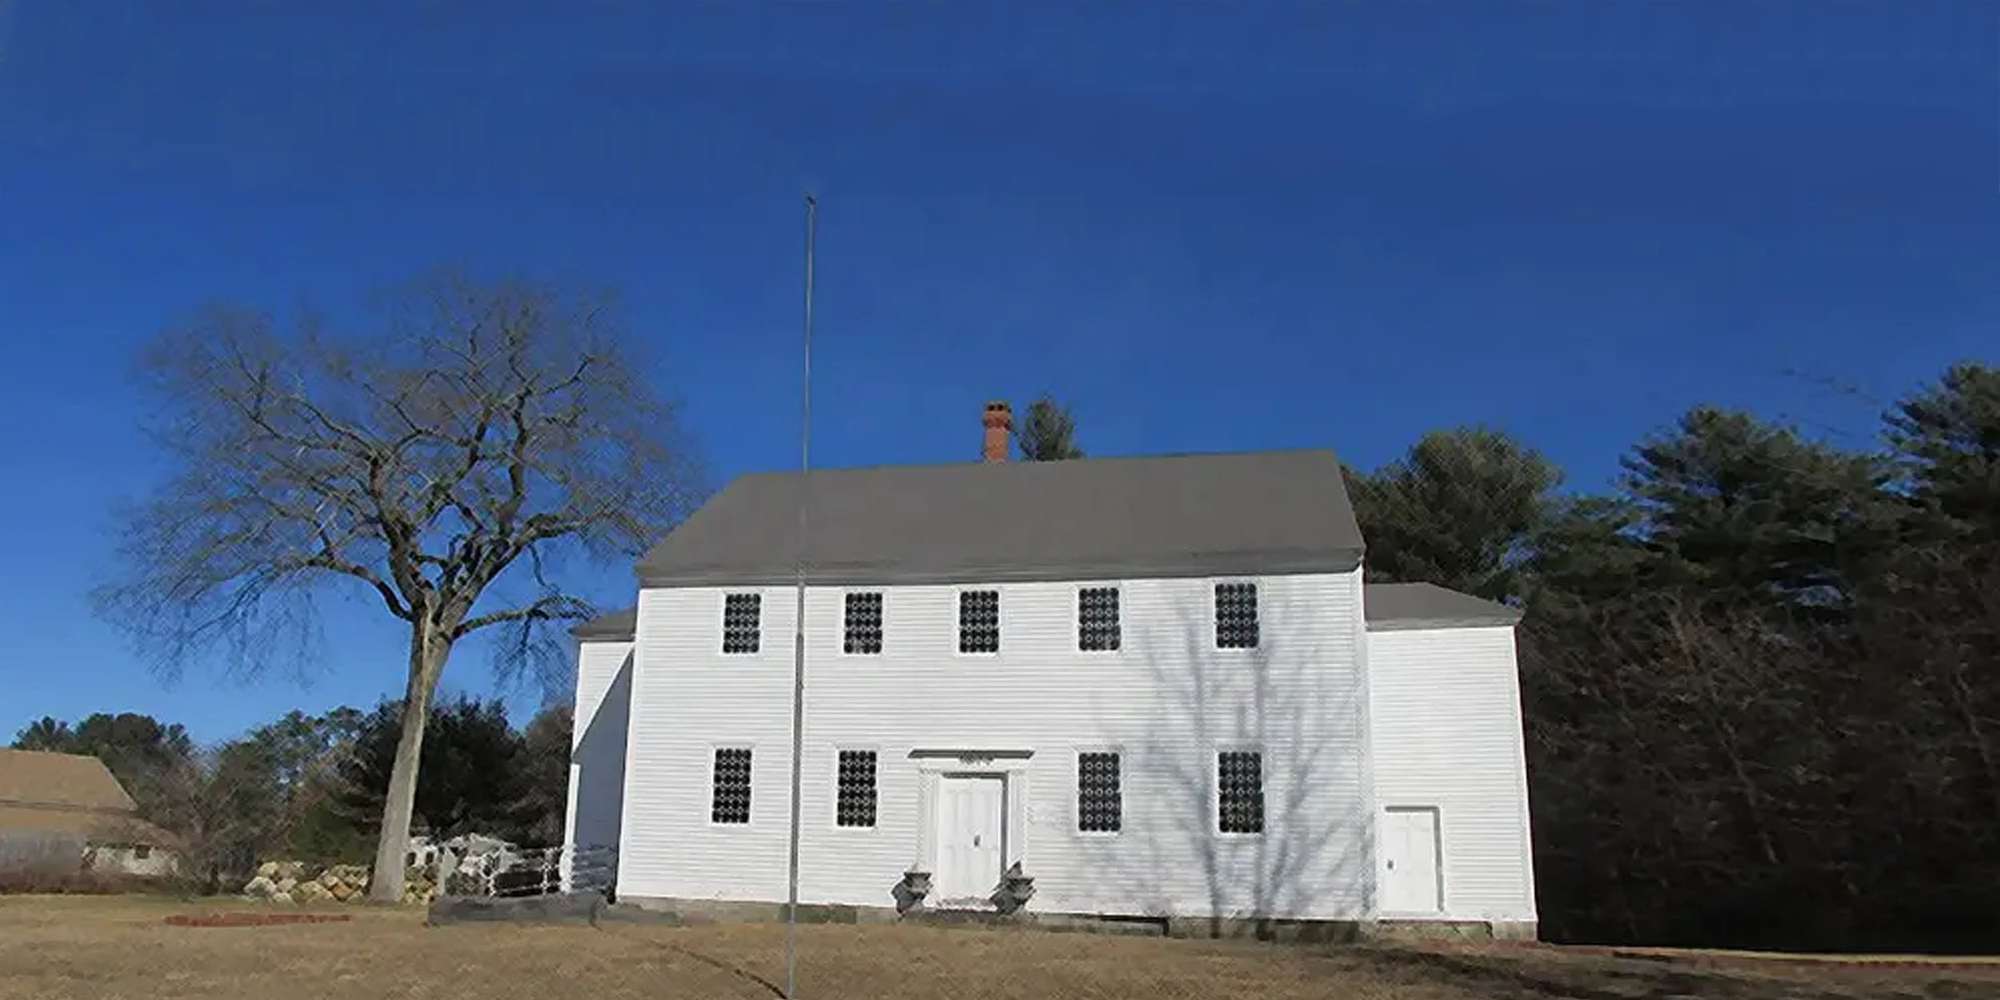 Photo of the Meeting House in Fremont, New Hampshire